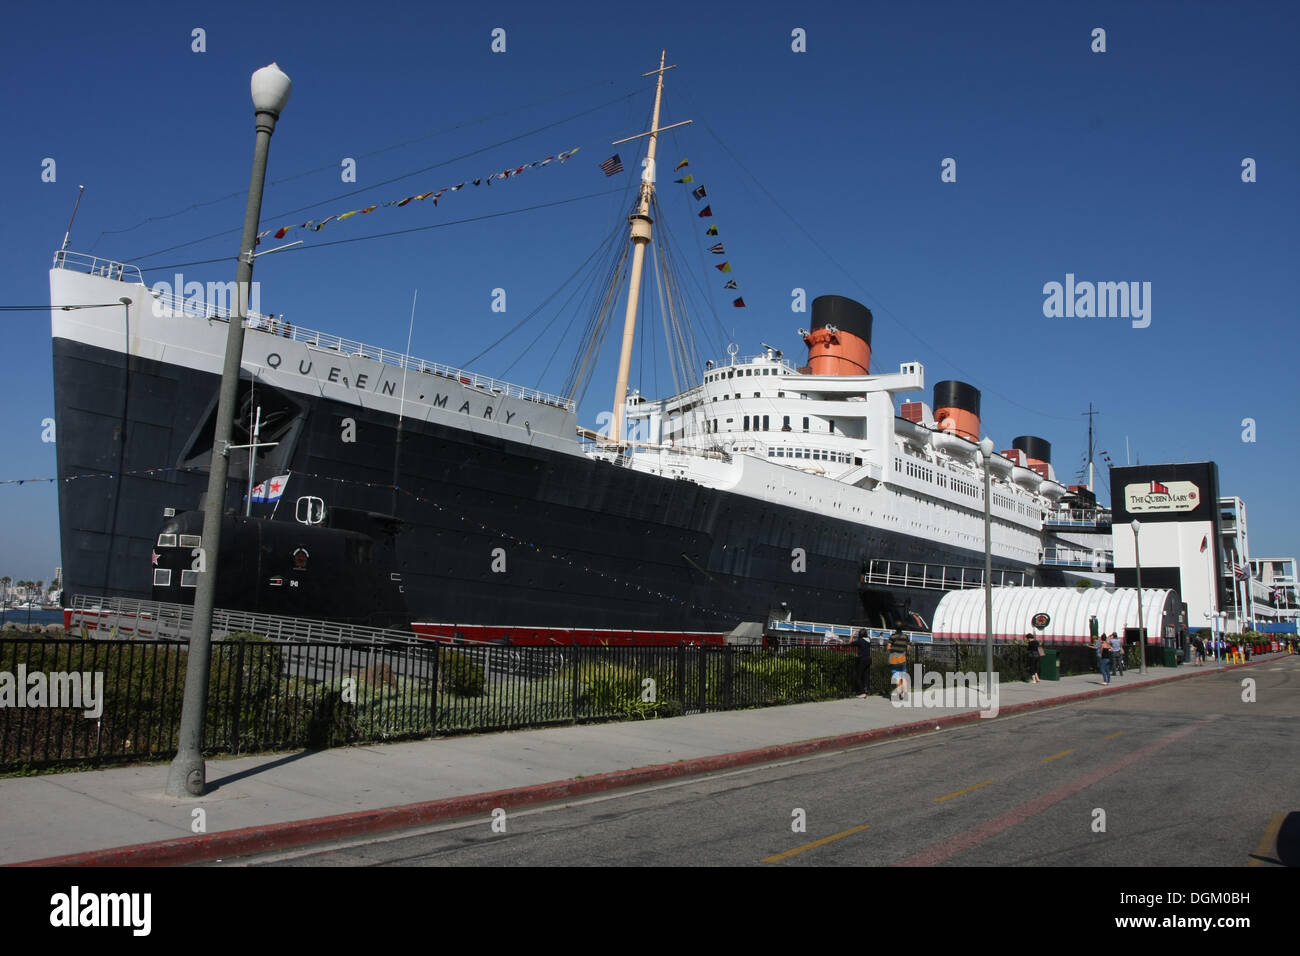 The Queen Mary 1 in port of Long Beach. The RMS Queen Mary was as liner from 1936 to 1967 in use. Since its shut down in 1967, the ship is the Hotel The Queen Mary and used successfully in the local harbor as museum, hotel and convention center.  Photo: Kl Stock Photo